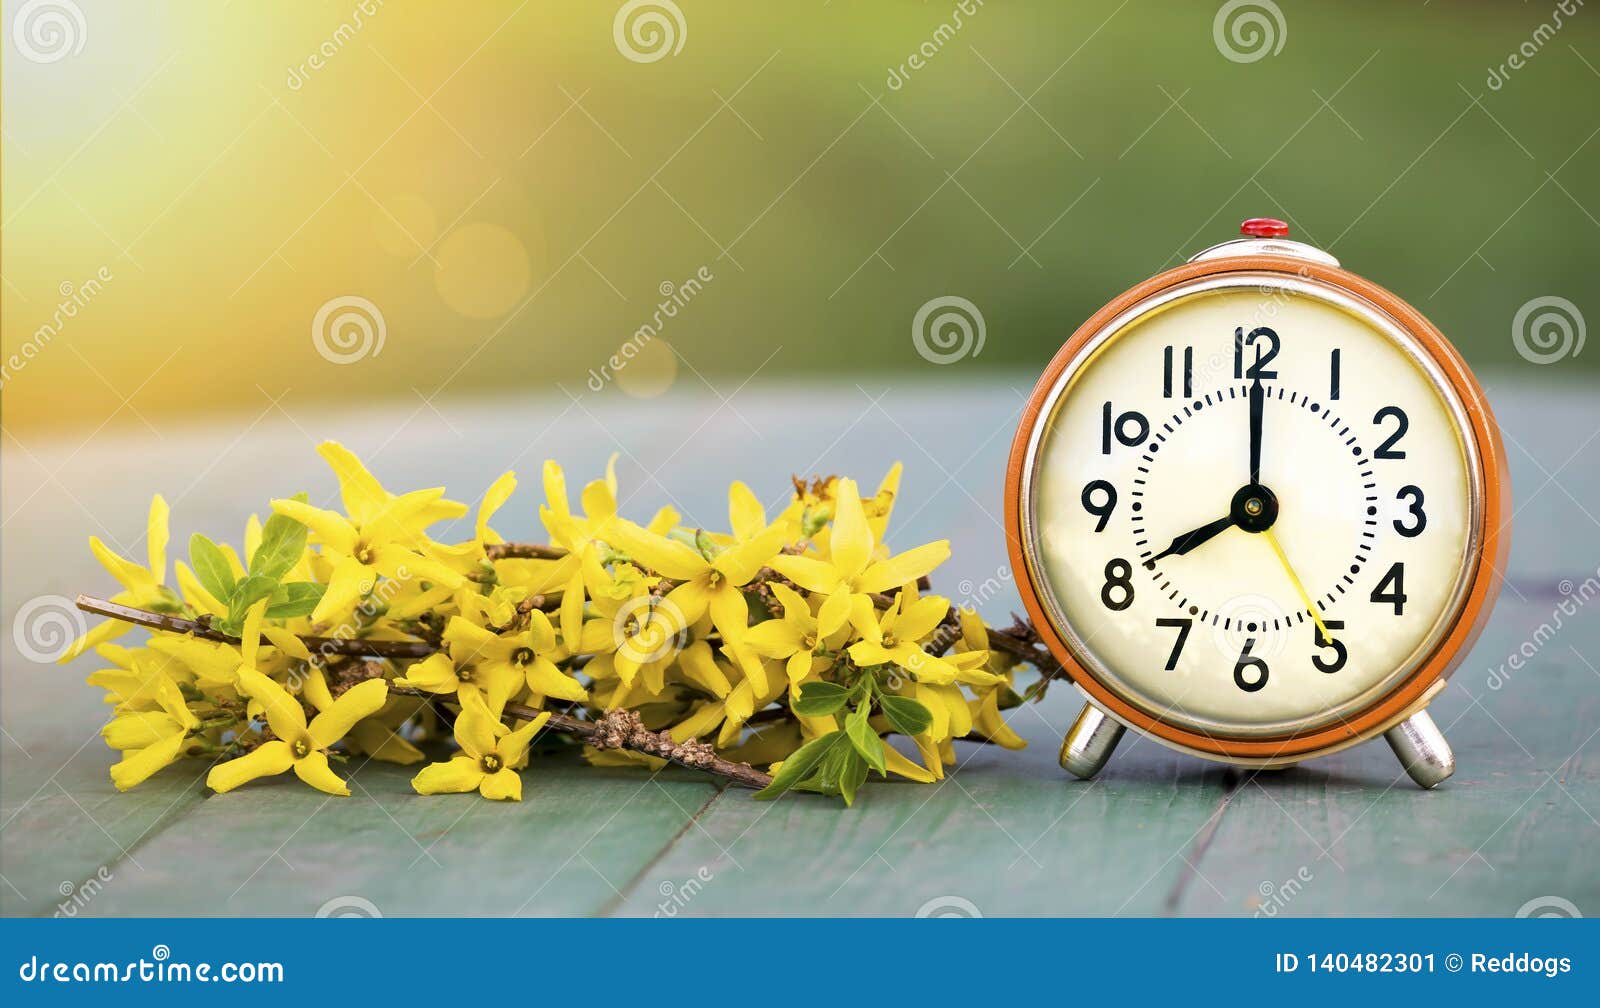 daylight savings time, spring forward - banner of an alarm clock and flowers